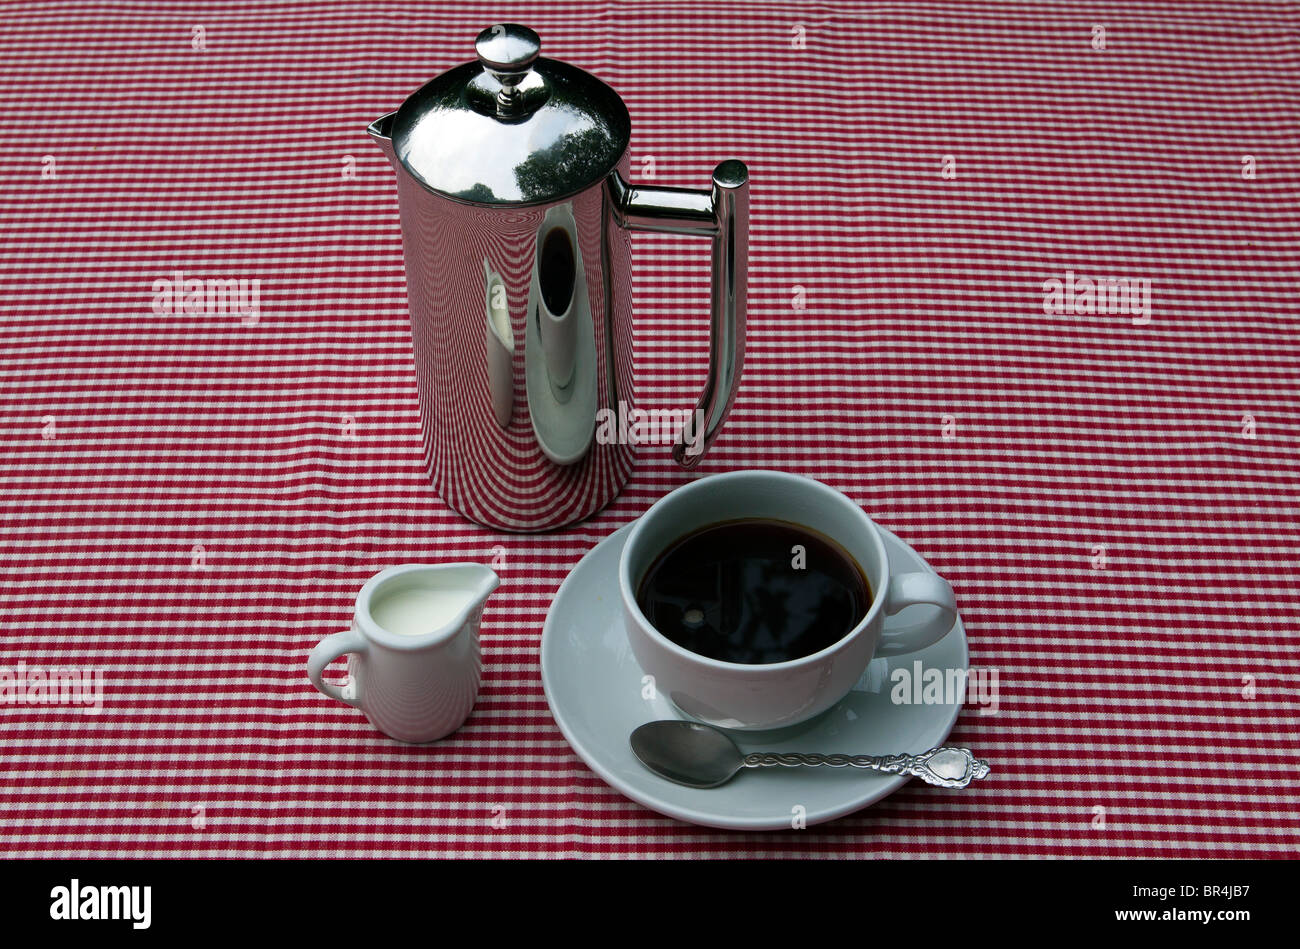 Neapolitan coffee maker with 4 ceramic coffee cups